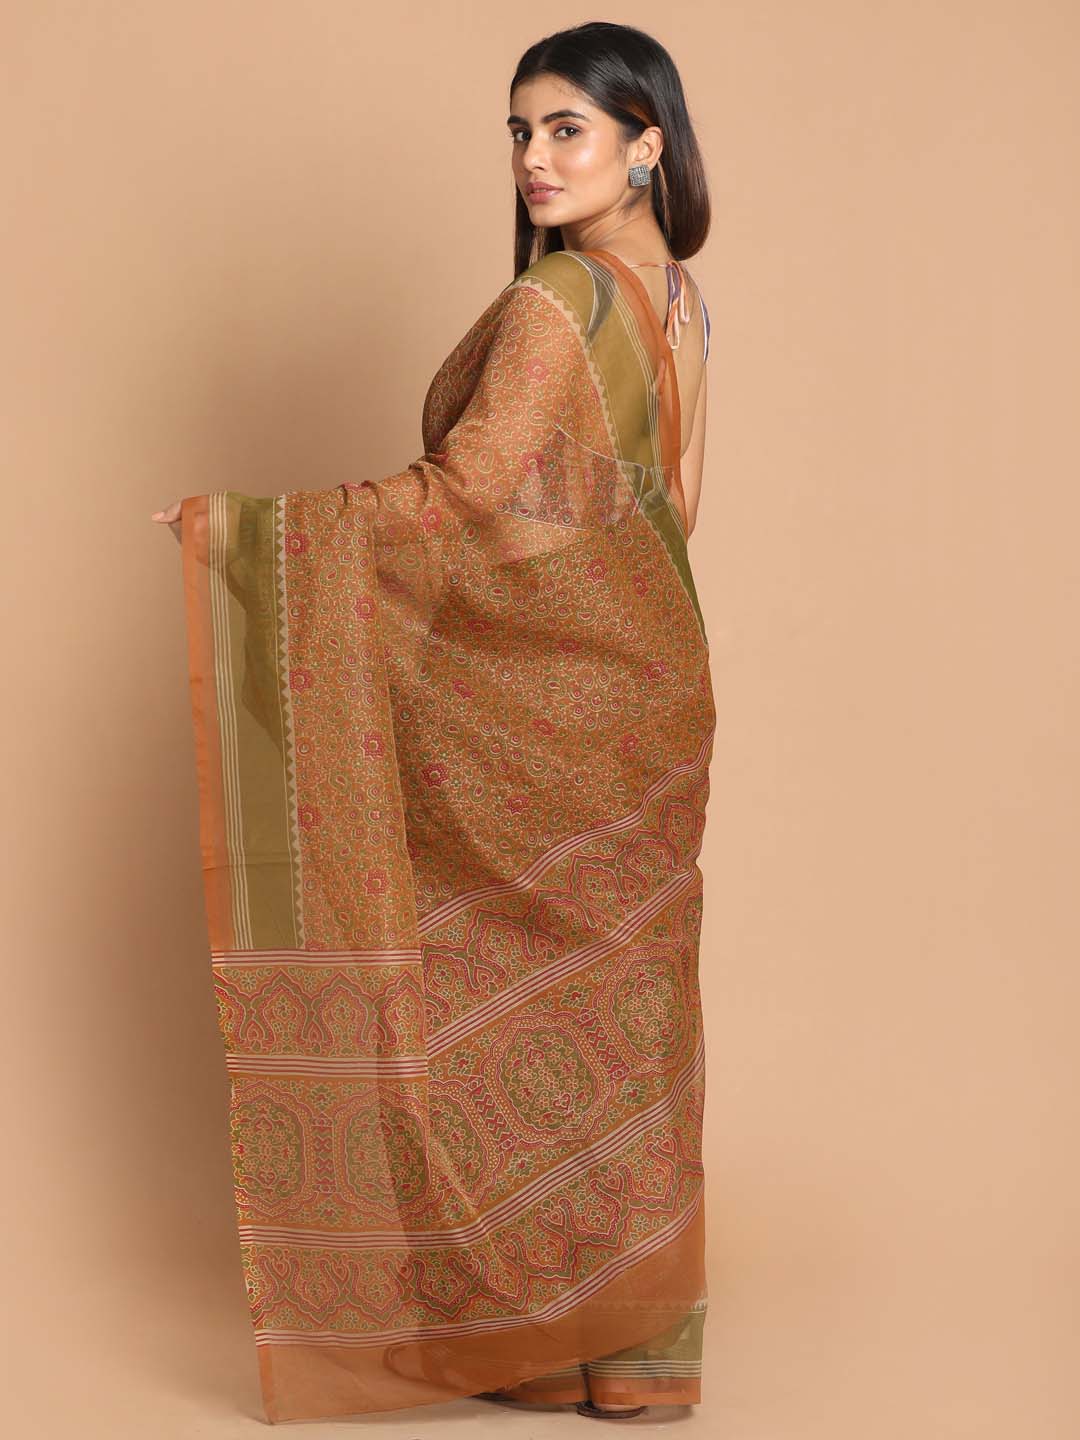 Indethnic Printed Cotton Blend Saree in Tan - View 3